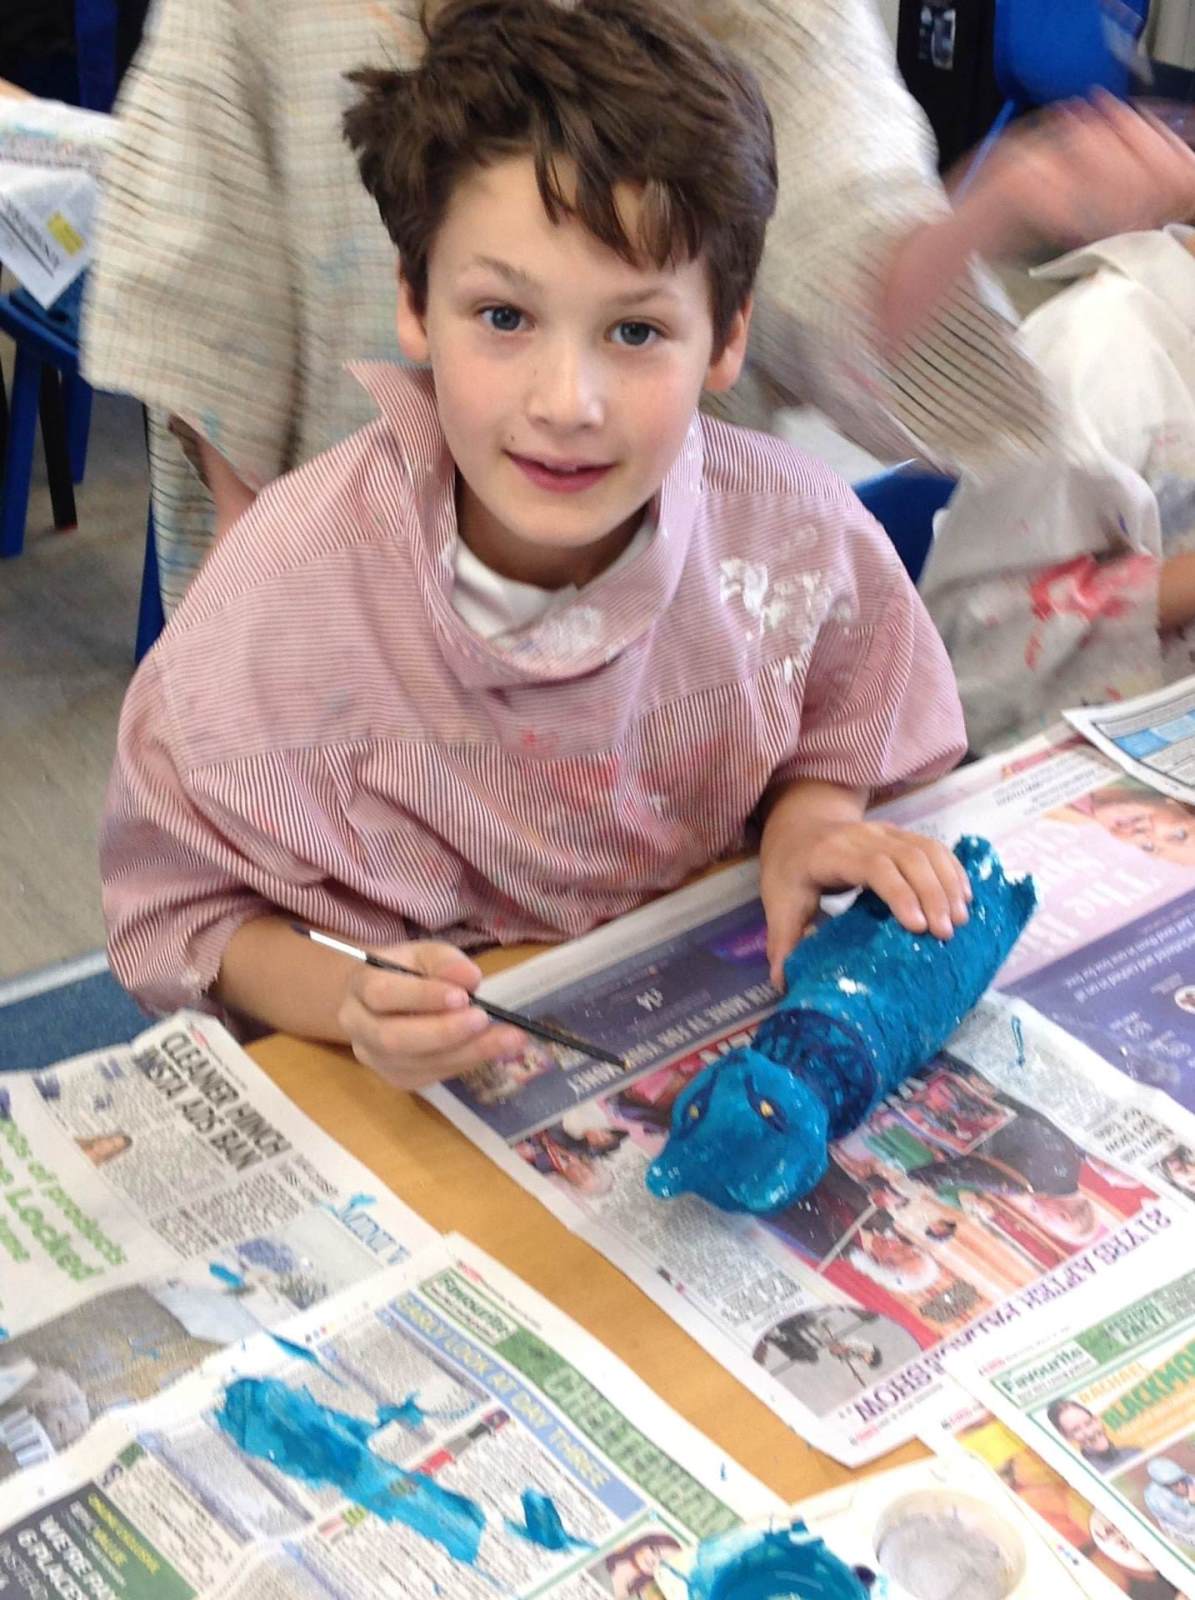 Painting our sculptures